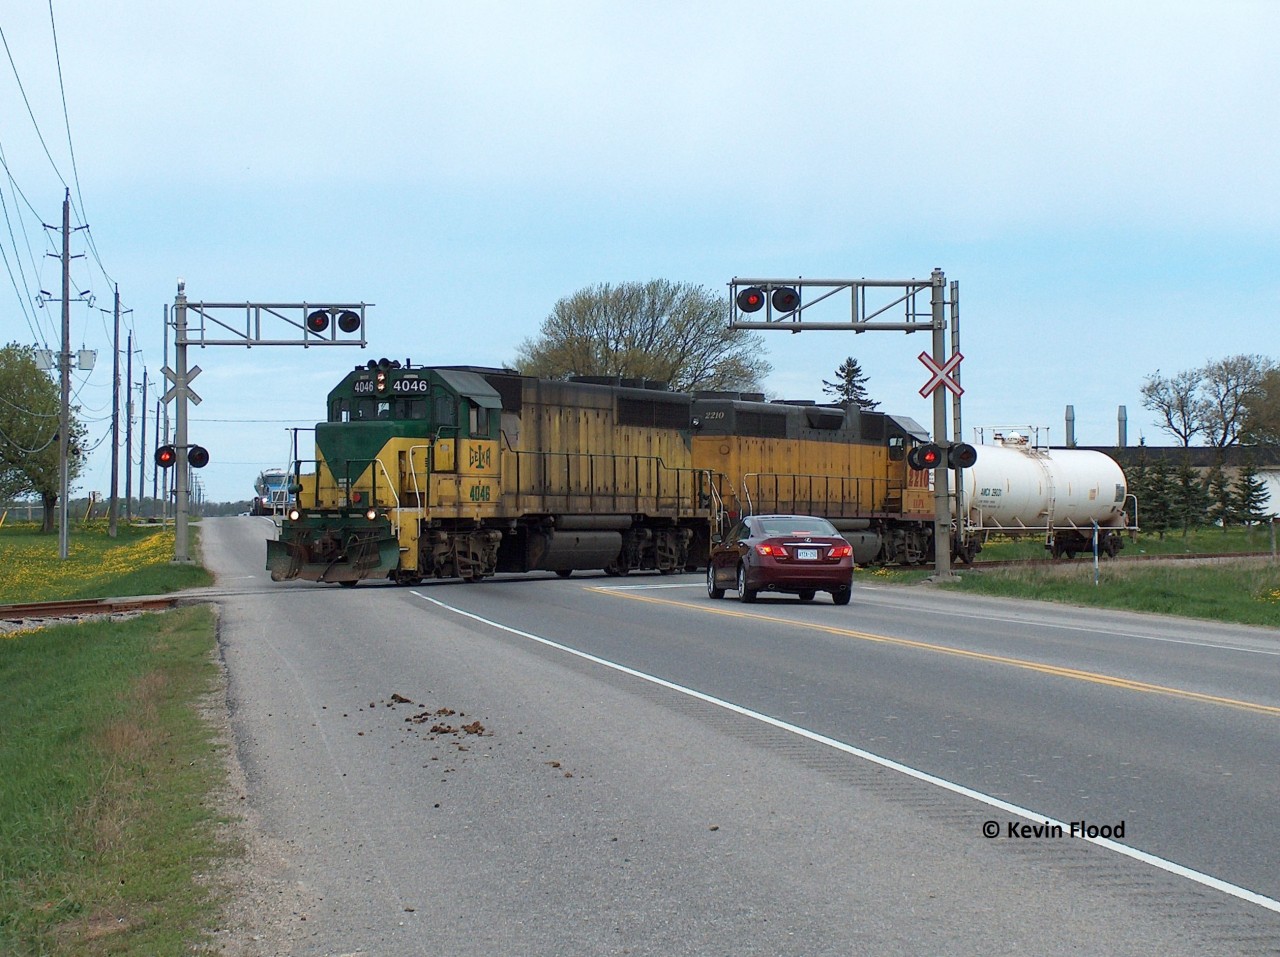 GEXR 4046-LLPX 2210 are pictured southbound from Elmira with one tank car in tow crossing Highway 86.